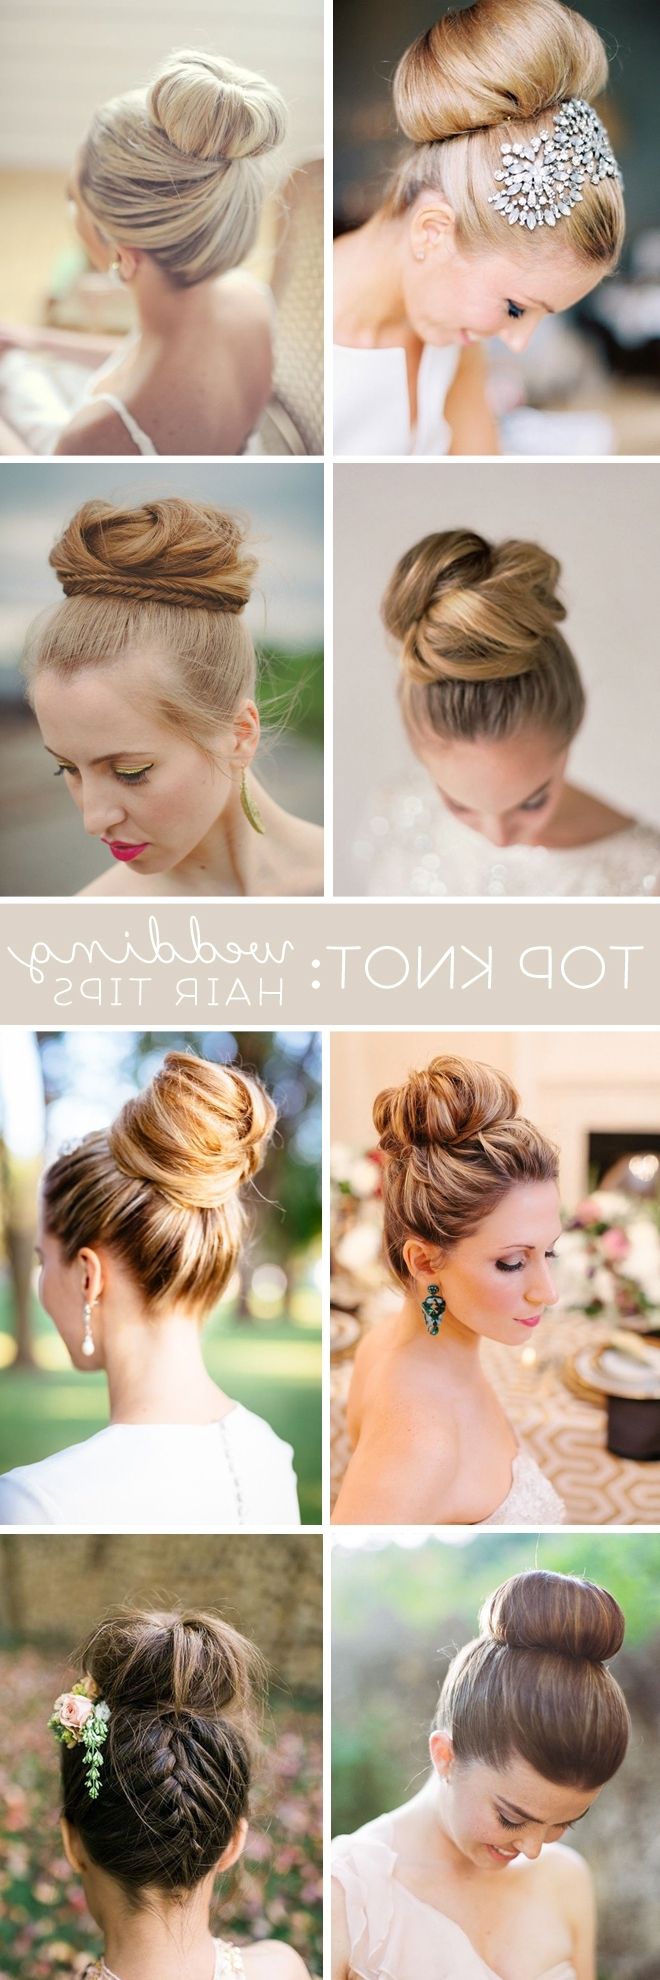 Awesome Wedding Hair Tips For Wearing A "top Knot" Bun For Current Knot Wedding Hairstyles (View 1 of 15)